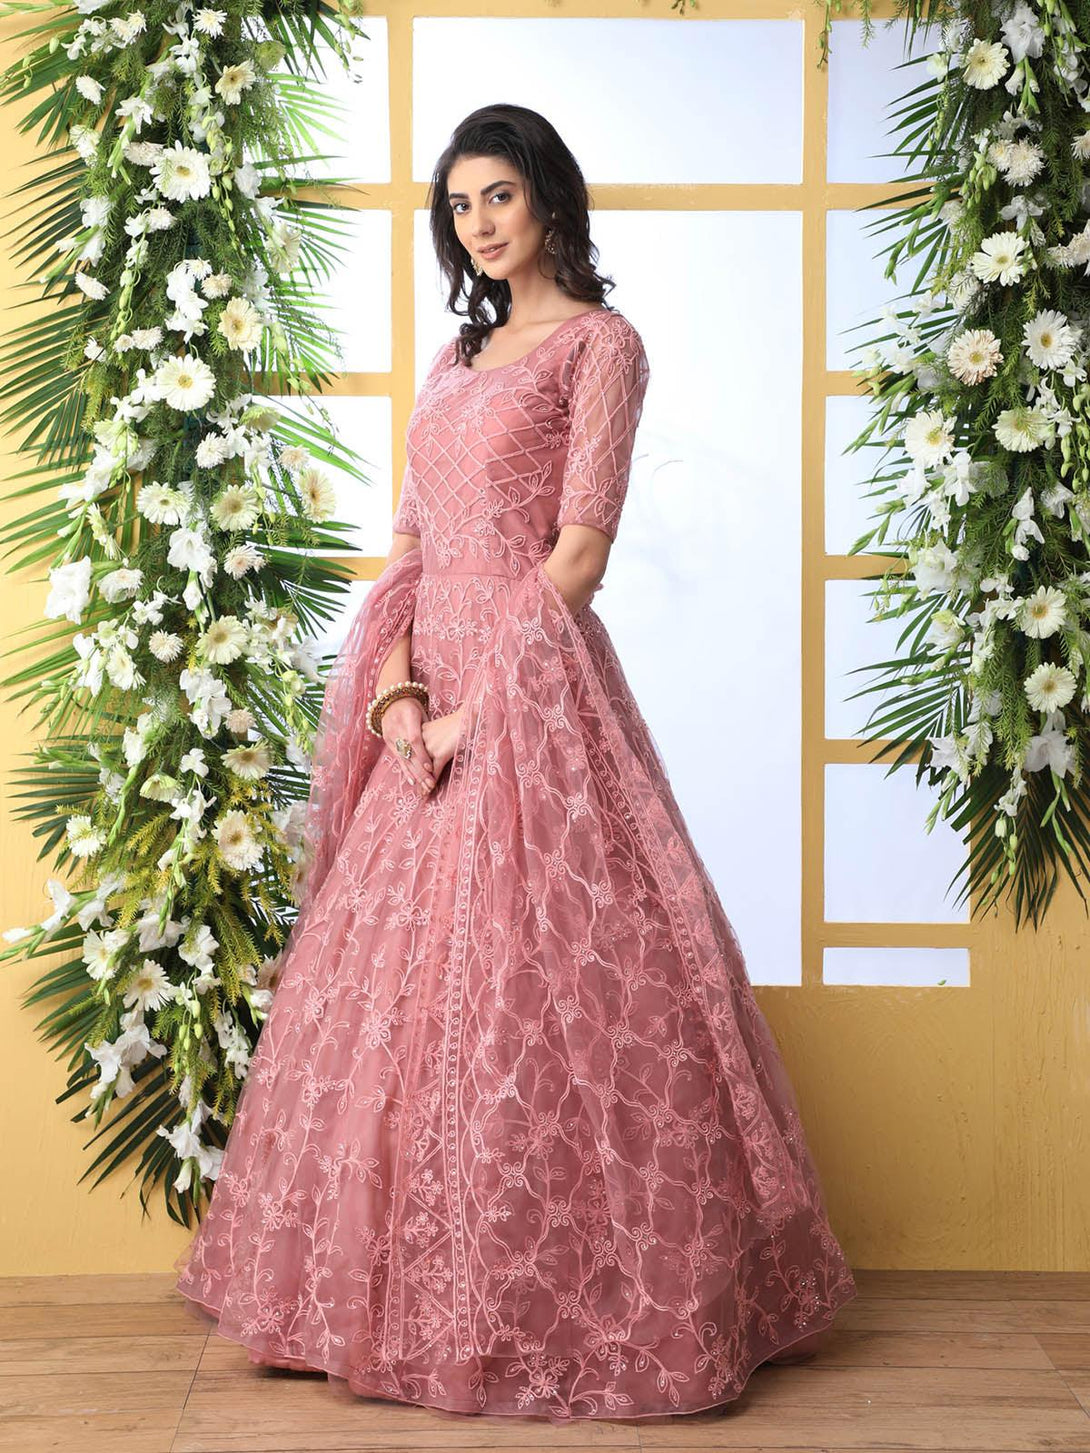 Anarkali Gown Enhanced with Embellishments for Women - ShopeClub